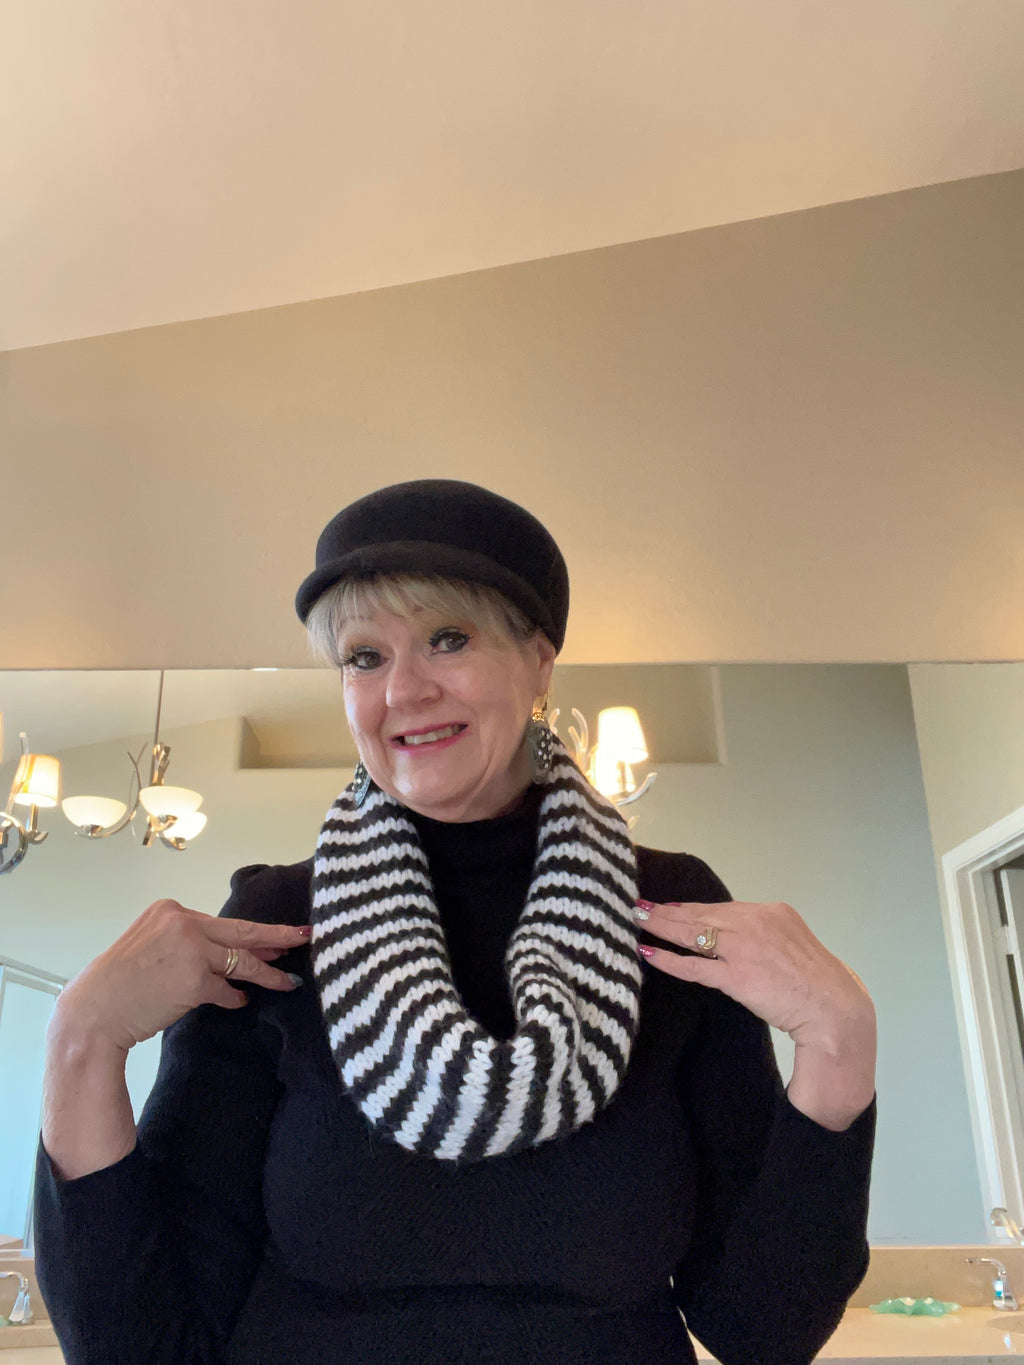 Black & White Striped Hand Knitted Infinity Scarf